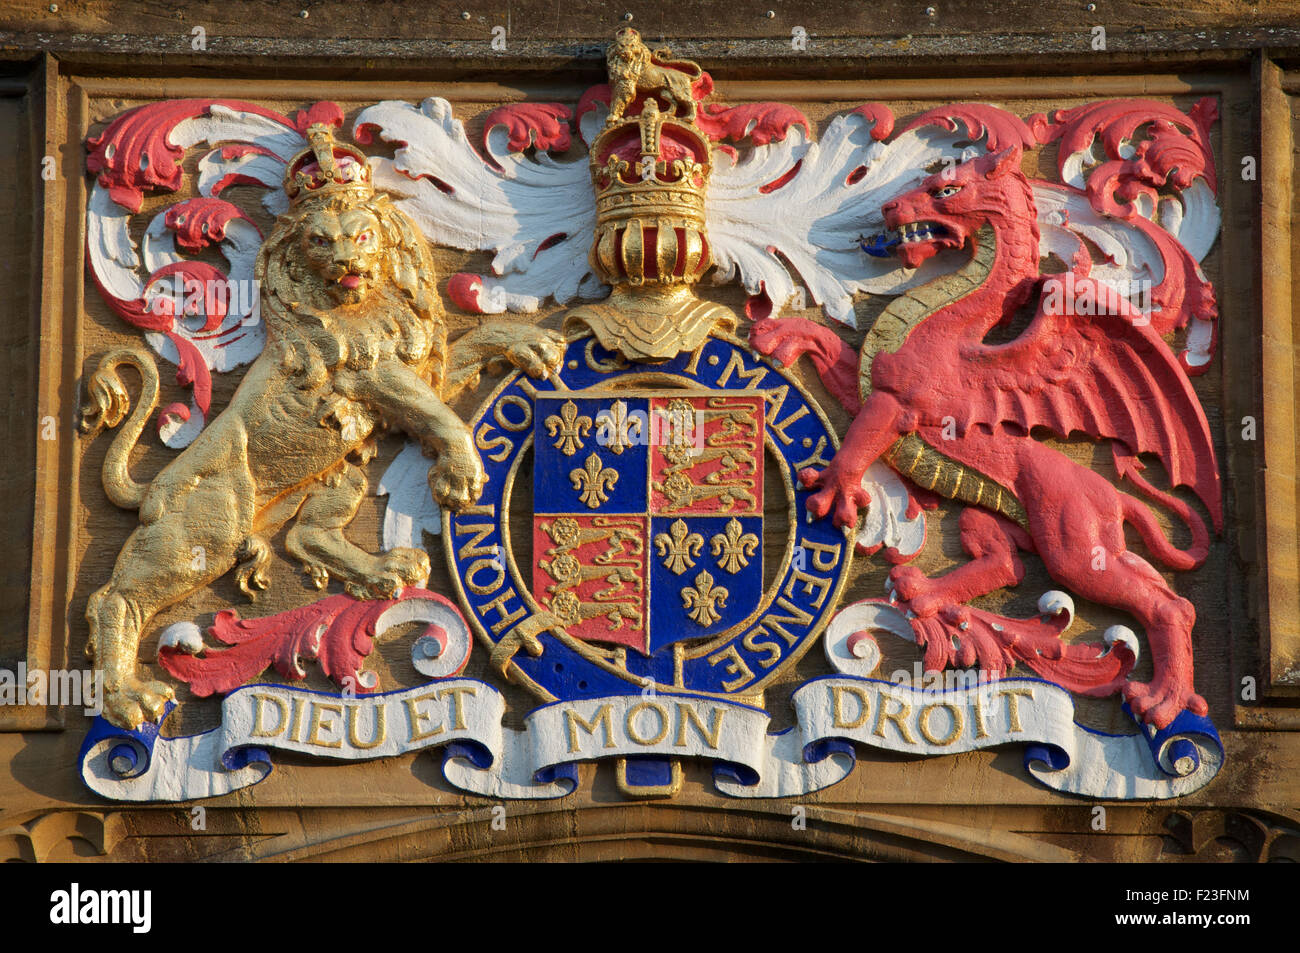 The Royal Coat of Arms of King Edward 6th above the entrance to Sherborne School, which was re-founded in his reign. Dorset, England, United Kingdom. Stock Photo